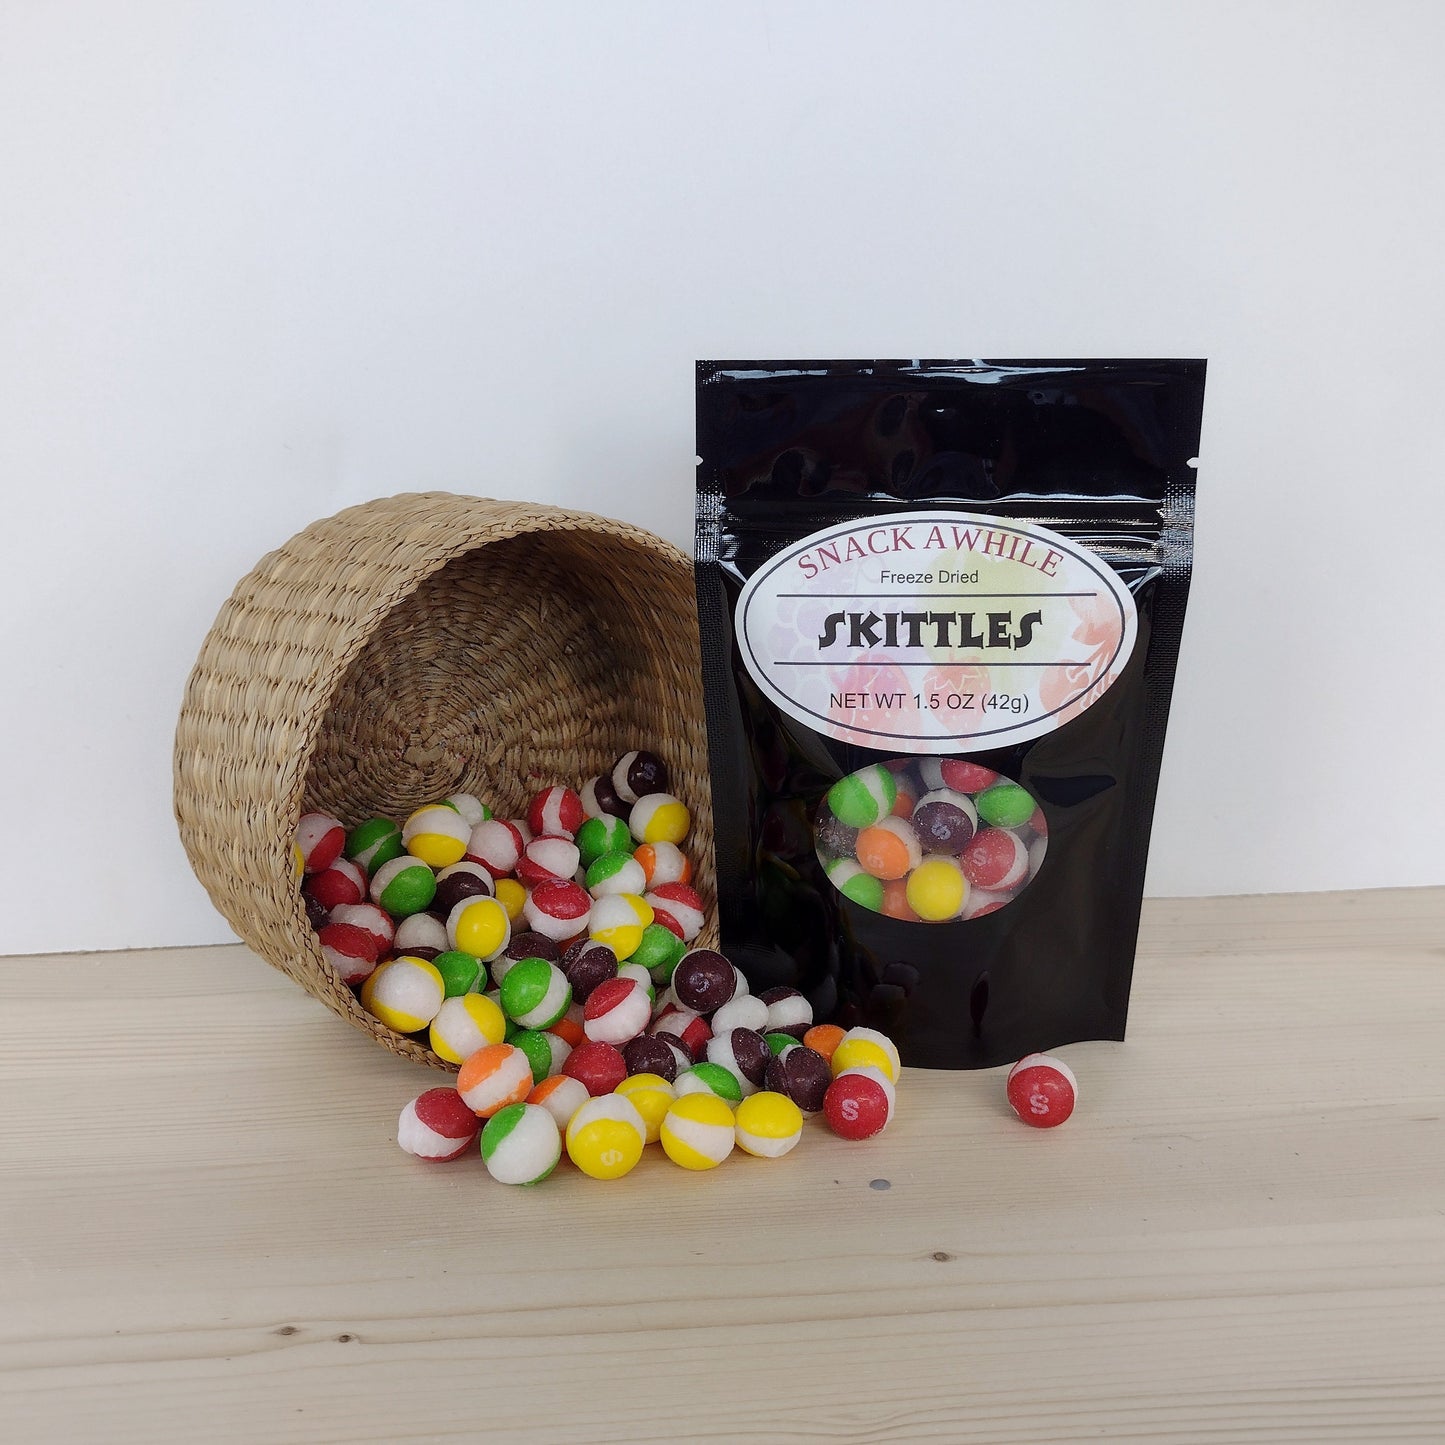 Snack Awhile freeze dried skittles candy flowing from a basket